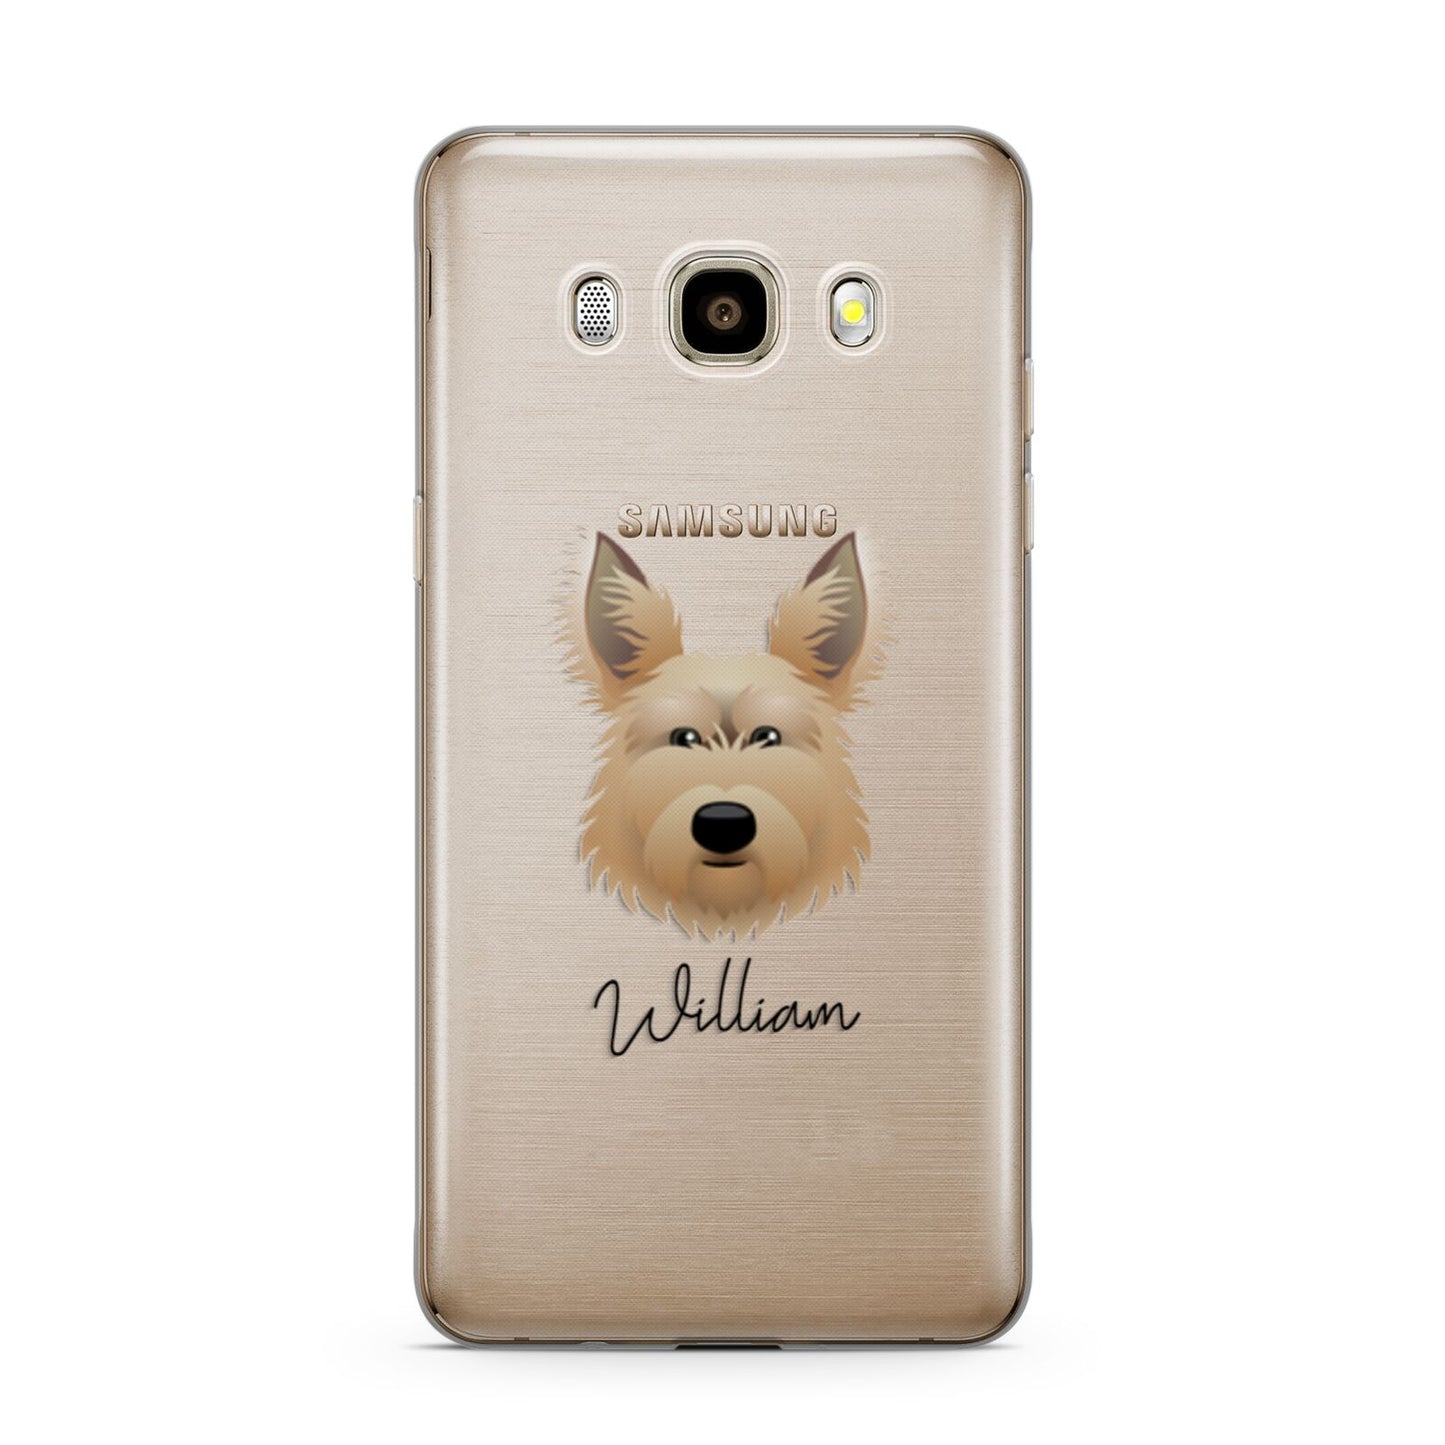 Picardy Sheepdog Personalised Samsung Galaxy J7 2016 Case on gold phone